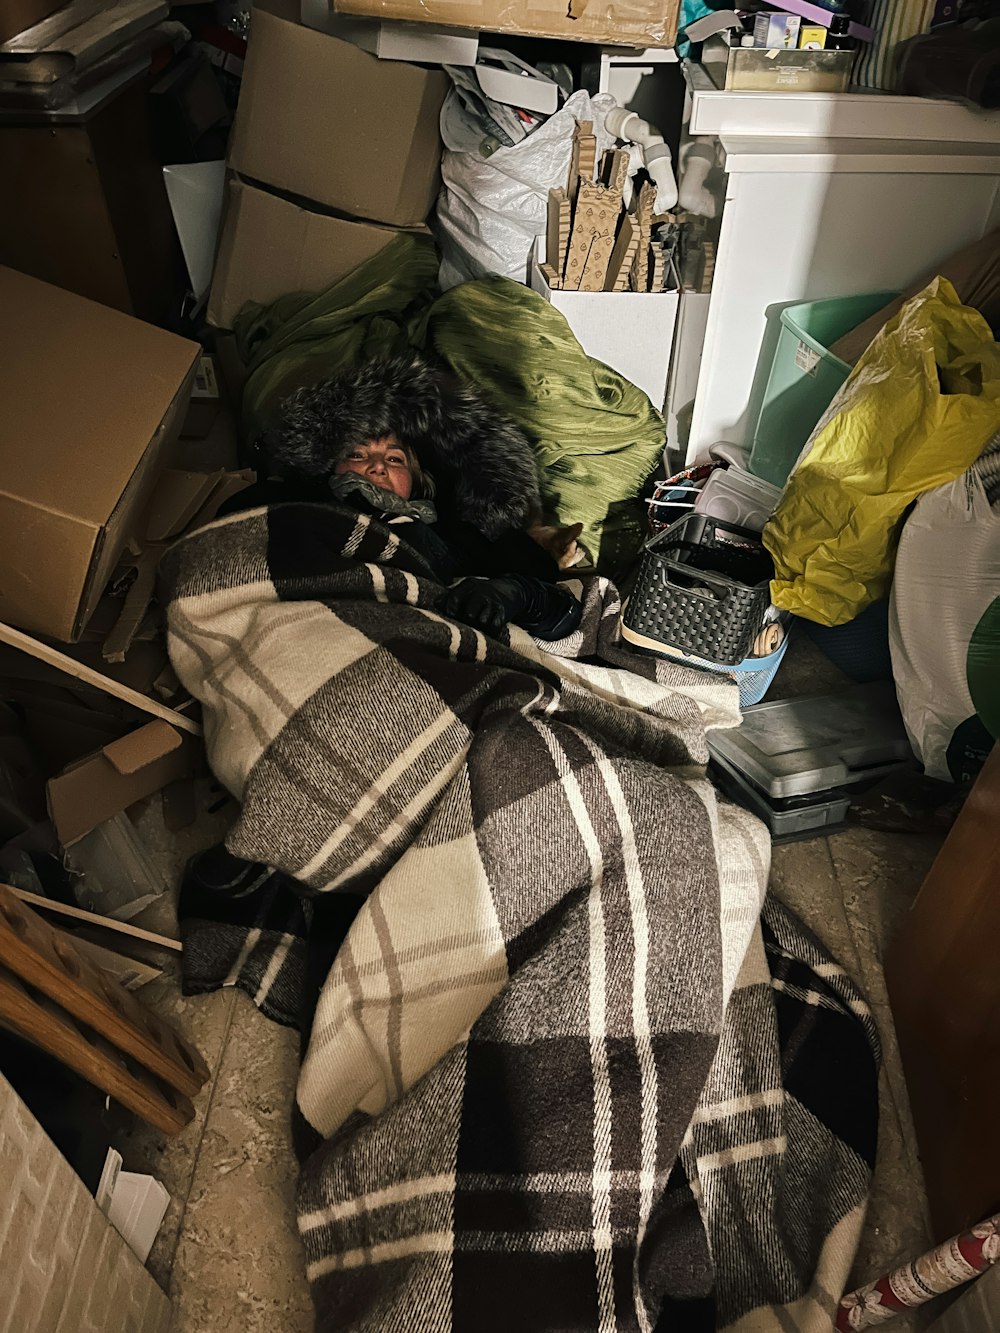 a pile of boxes and blankets in a room